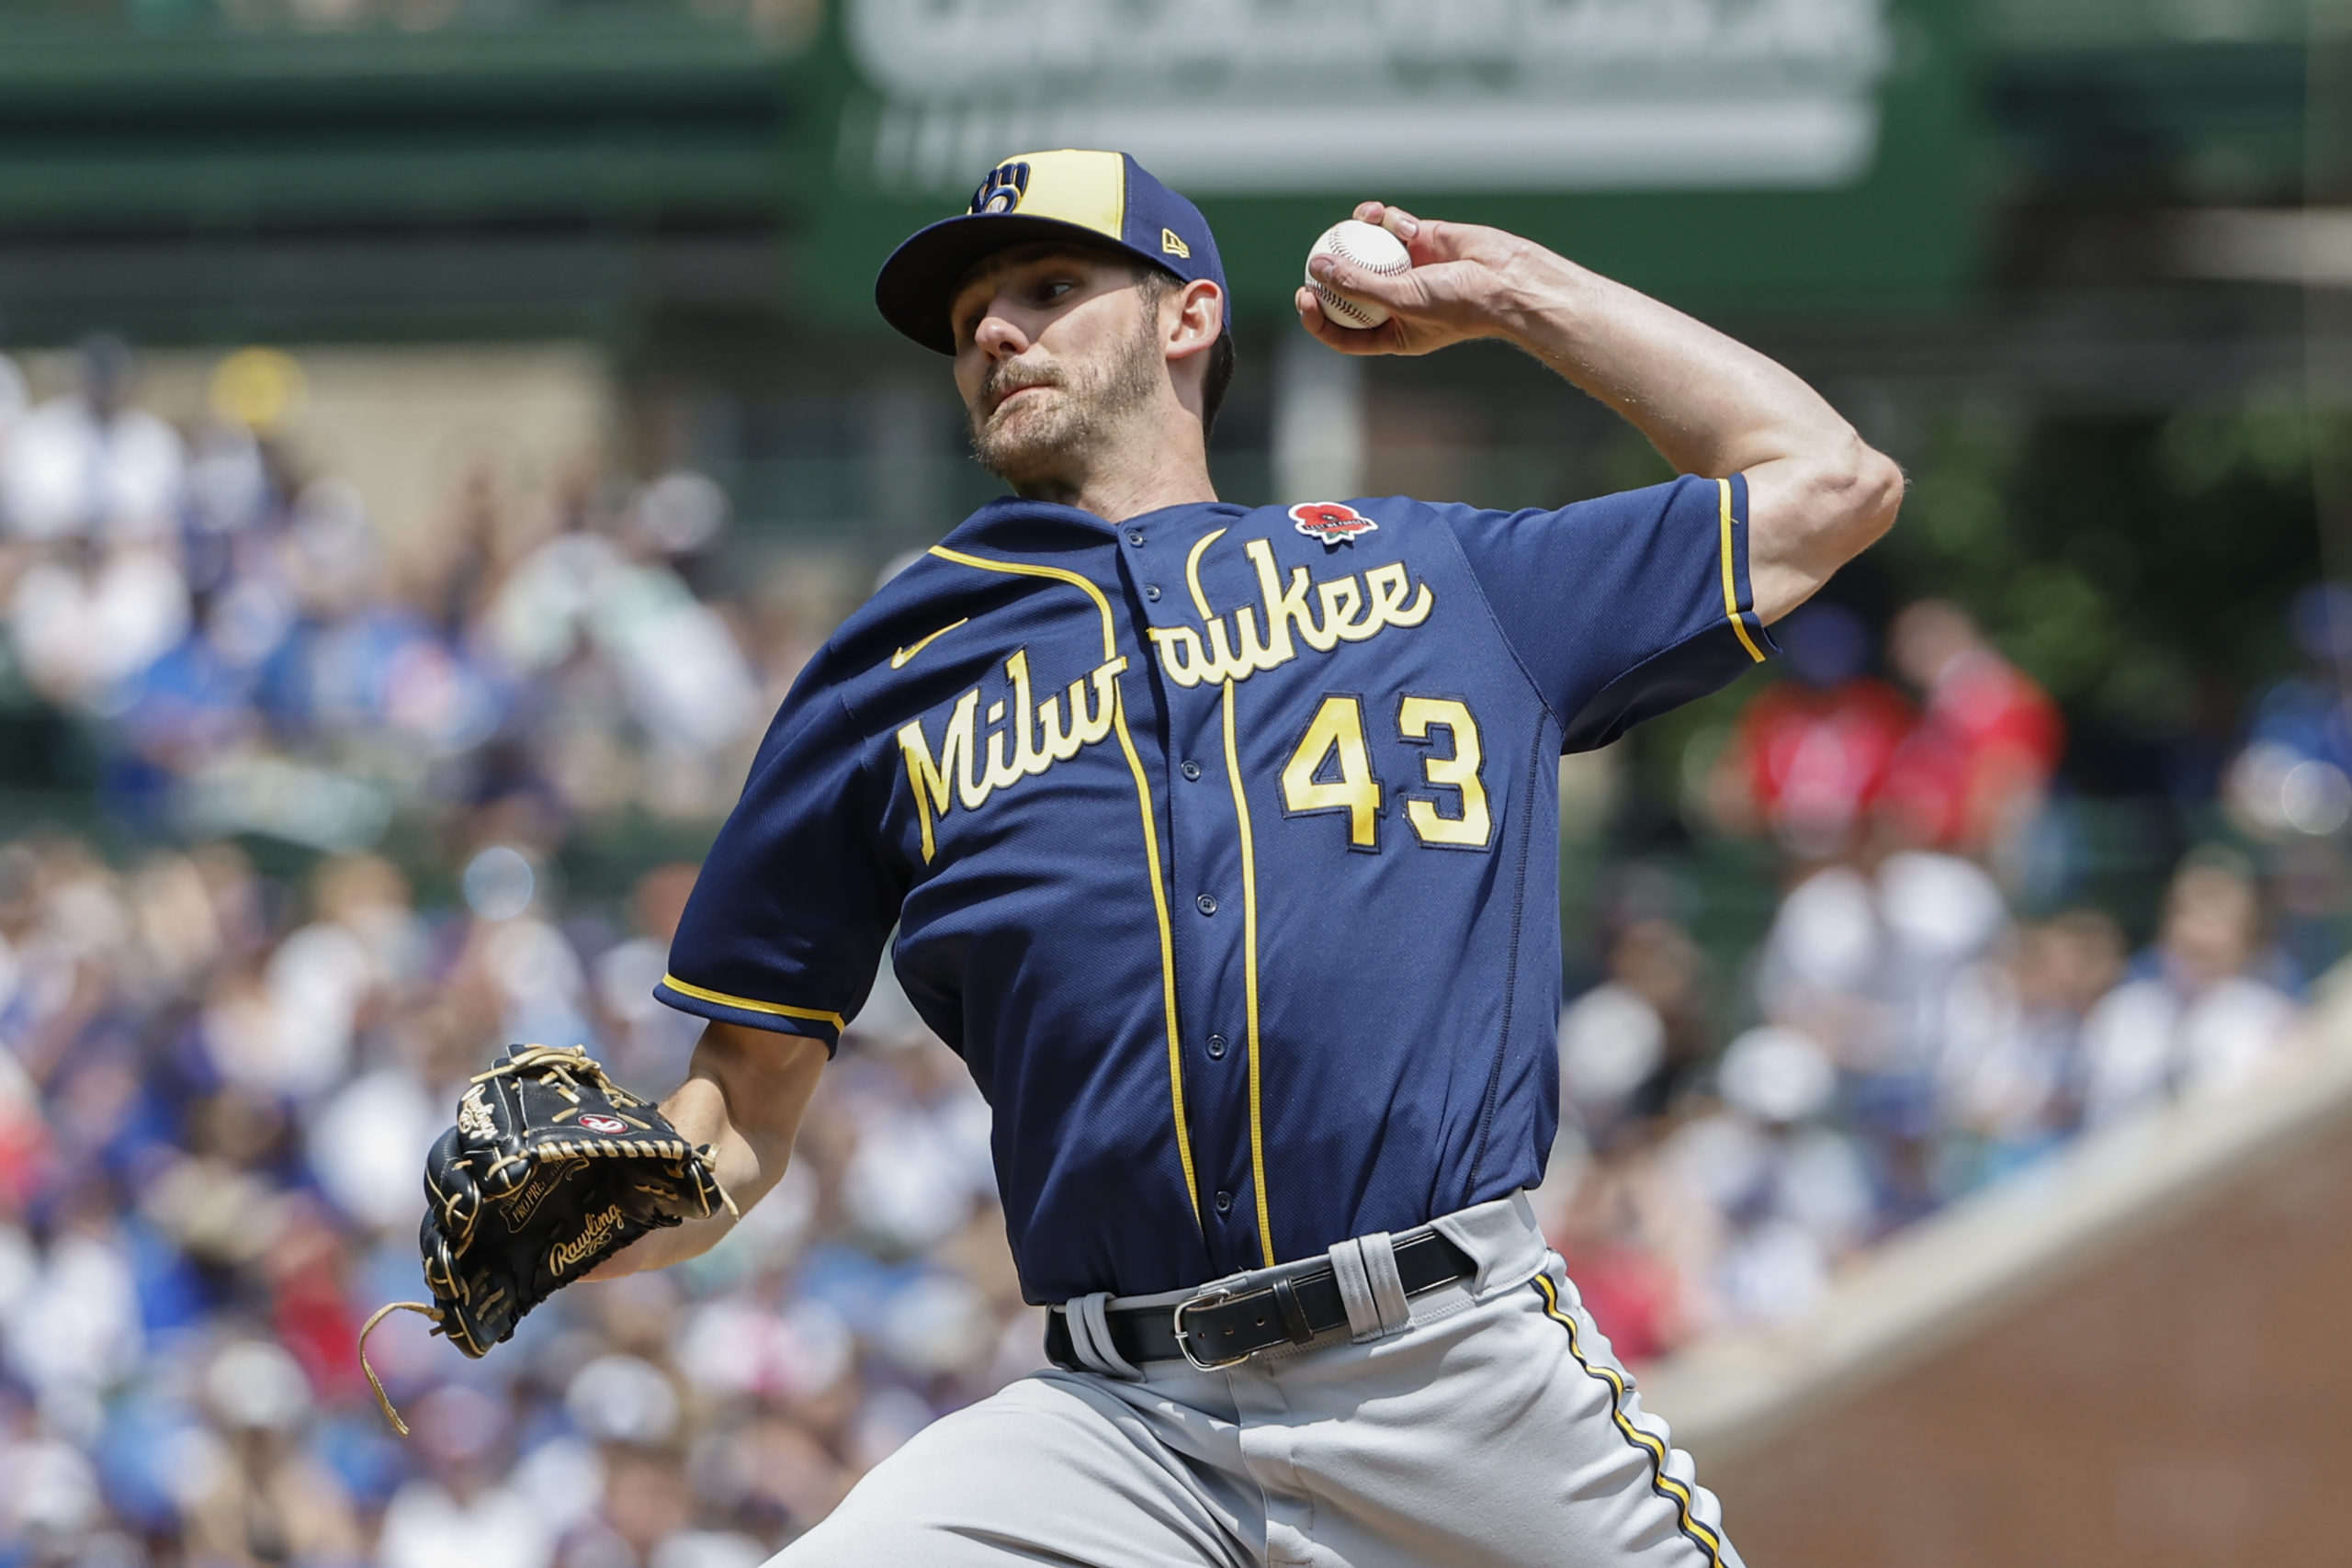 Brewers call up ex-Bulldog Ethan Small to make MLB debut - The Dispatch